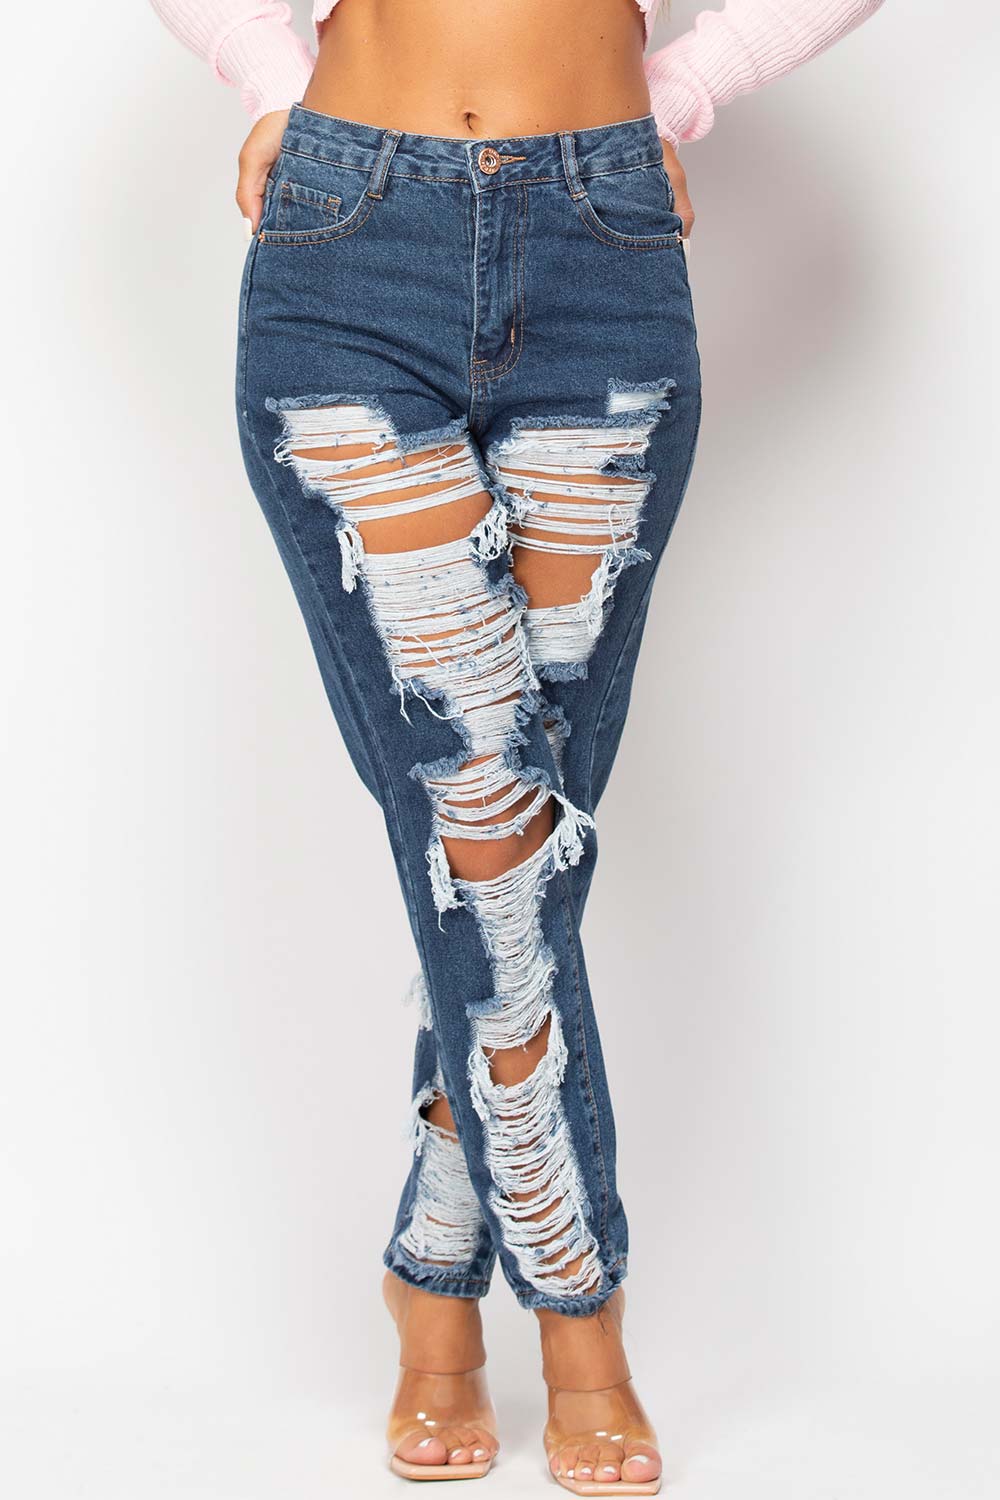 high waisted ripped mom jeans uk